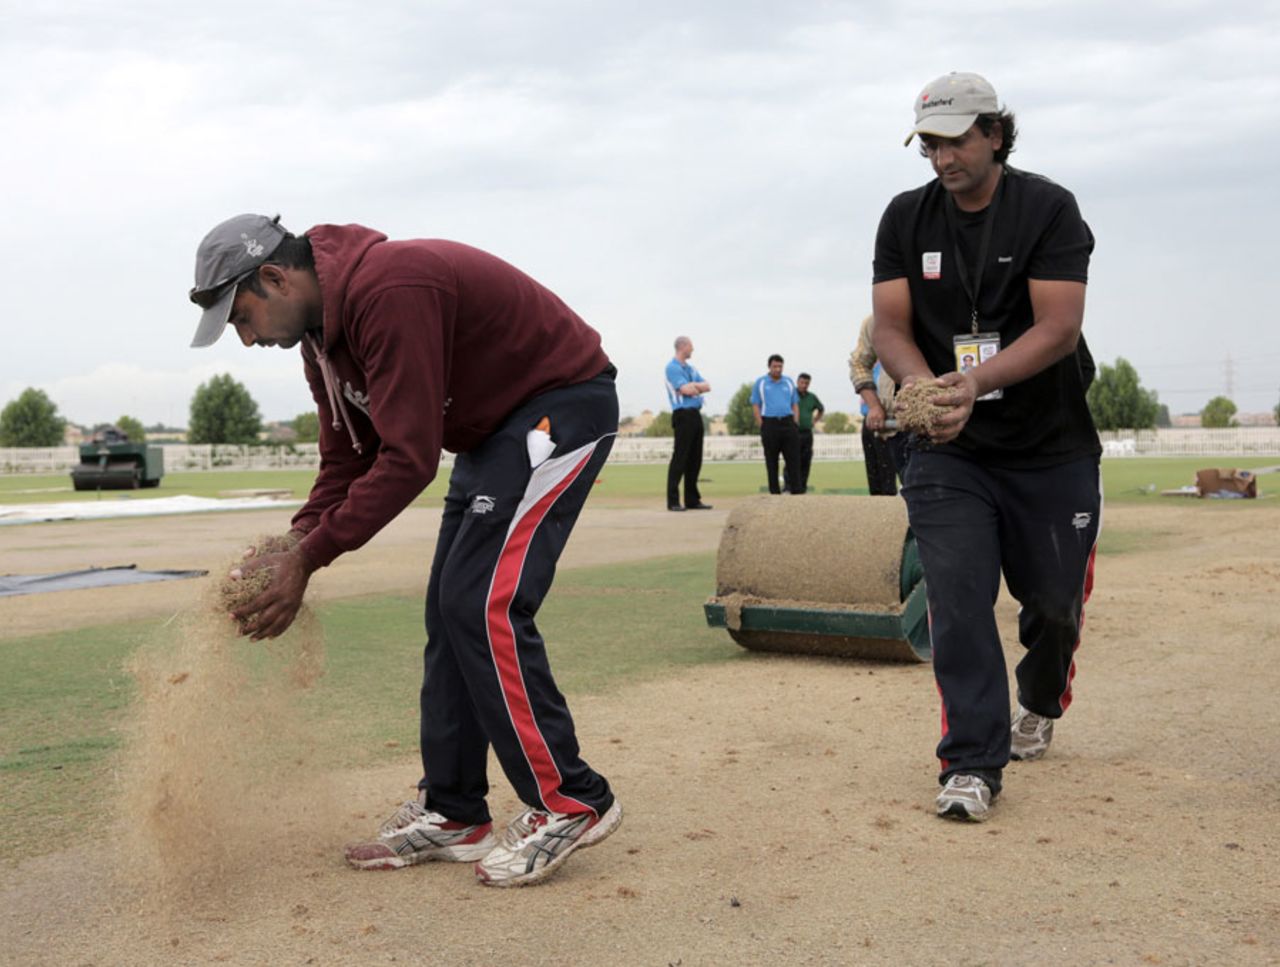 Ground staff put sawdust on patches of wet outfield, Uganda v United States of America, ICC World Twenty20 Qualifier, Group A, Abu Dhabi, November 21, 2013